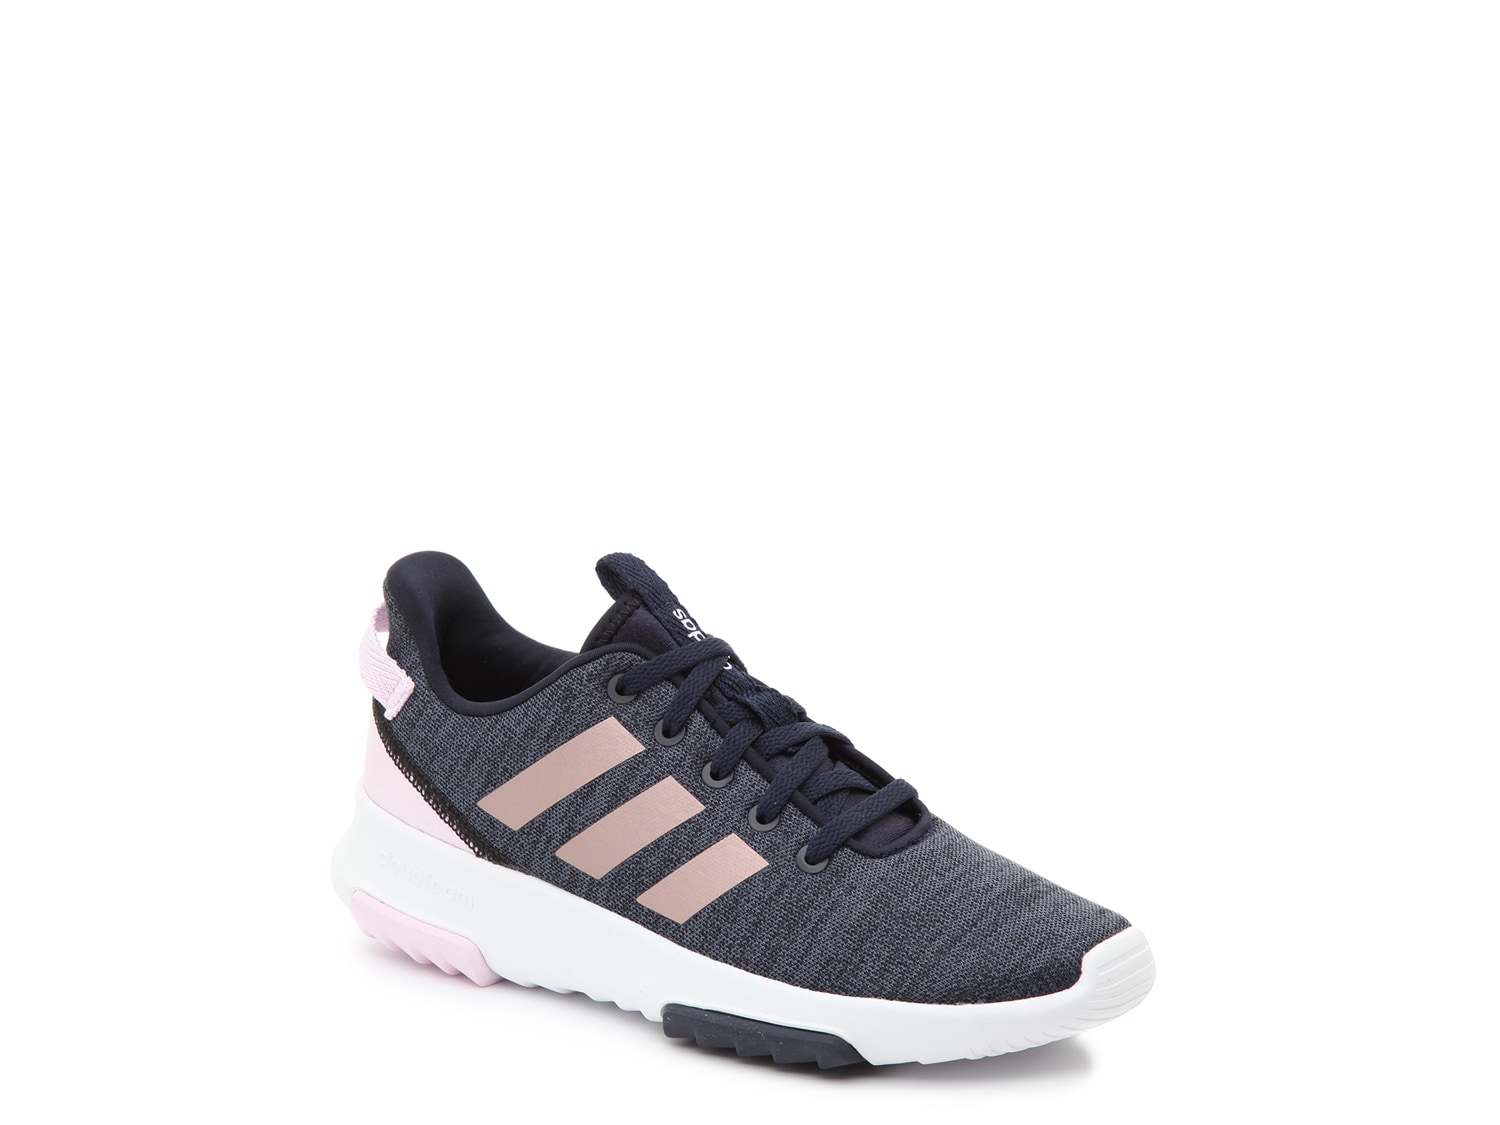 adidas racer tr toddler & youth sneaker